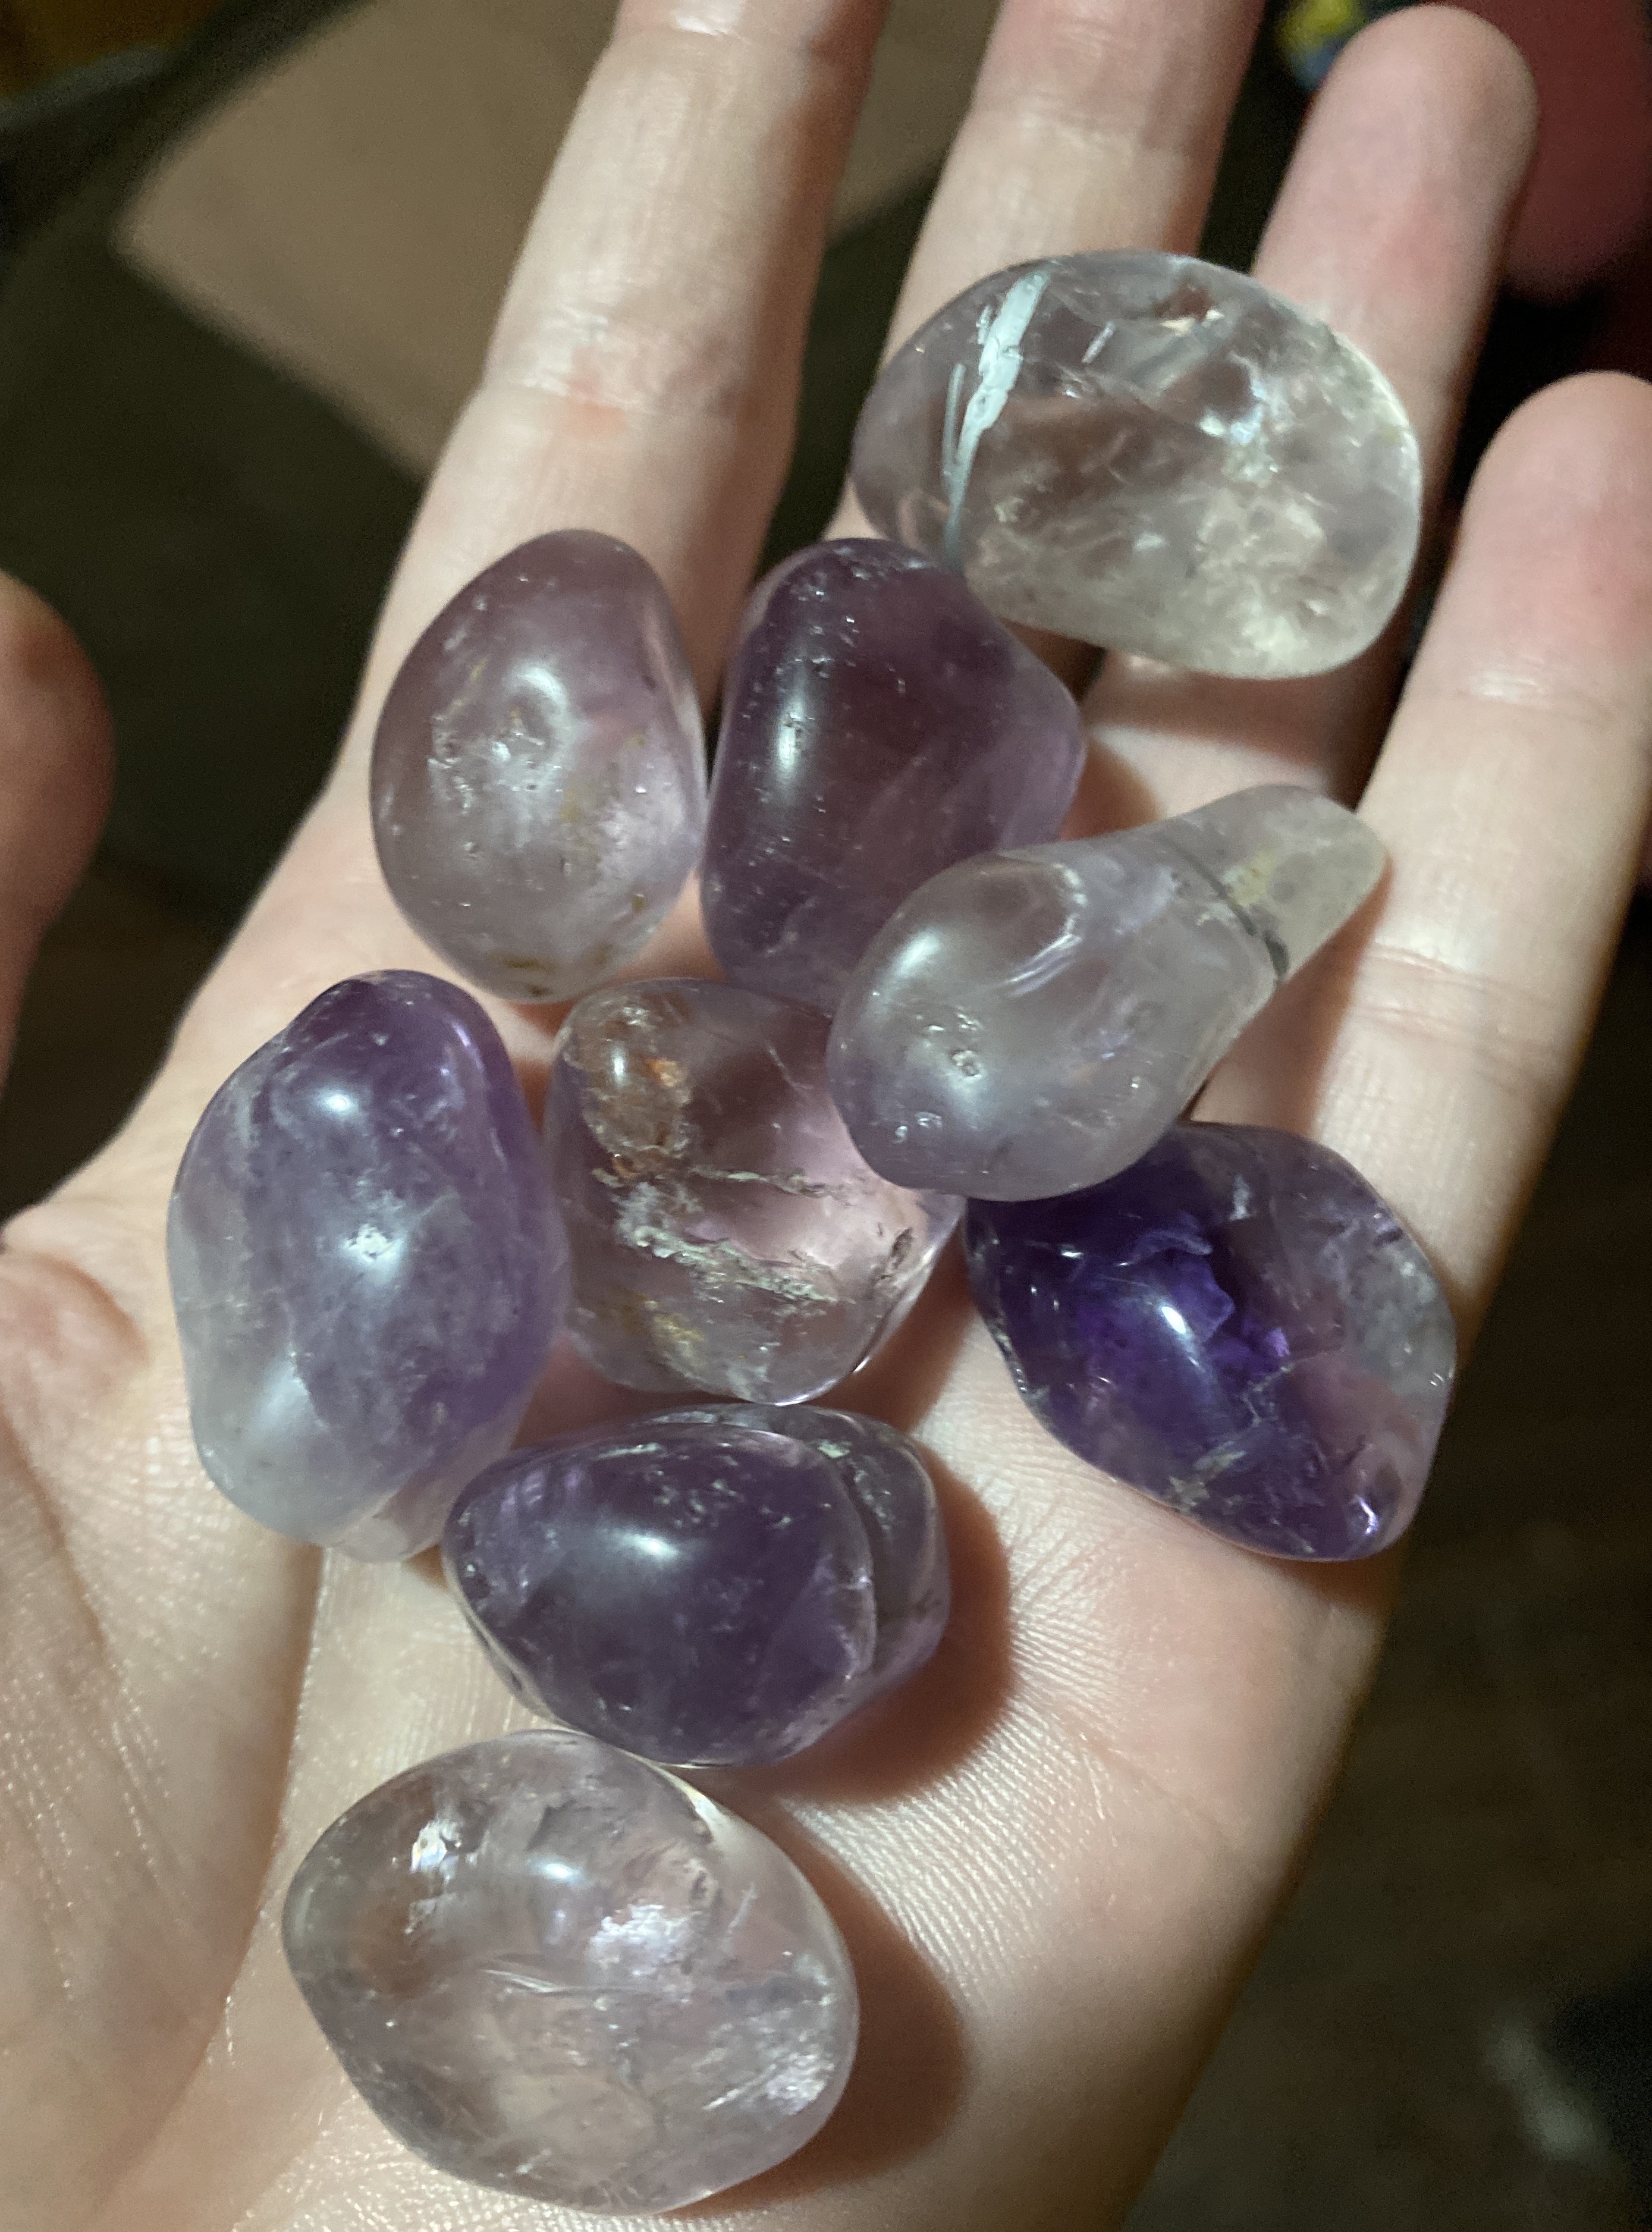 9 translucent rocks ranging from clear to purple, held in someone's left palm